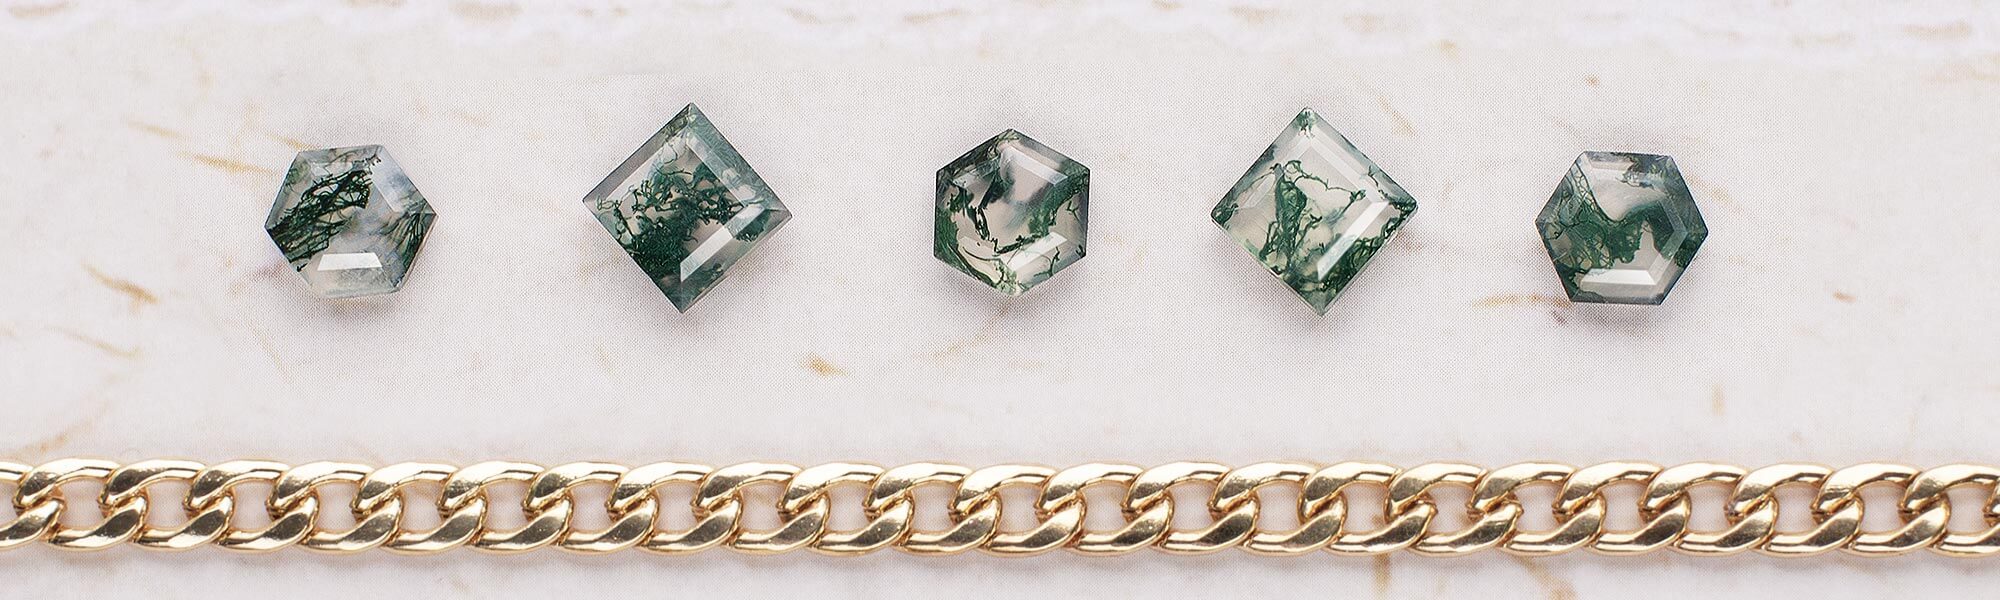 examples of moss agate gemstones with green inclusions - a perfect stone for the nature lover